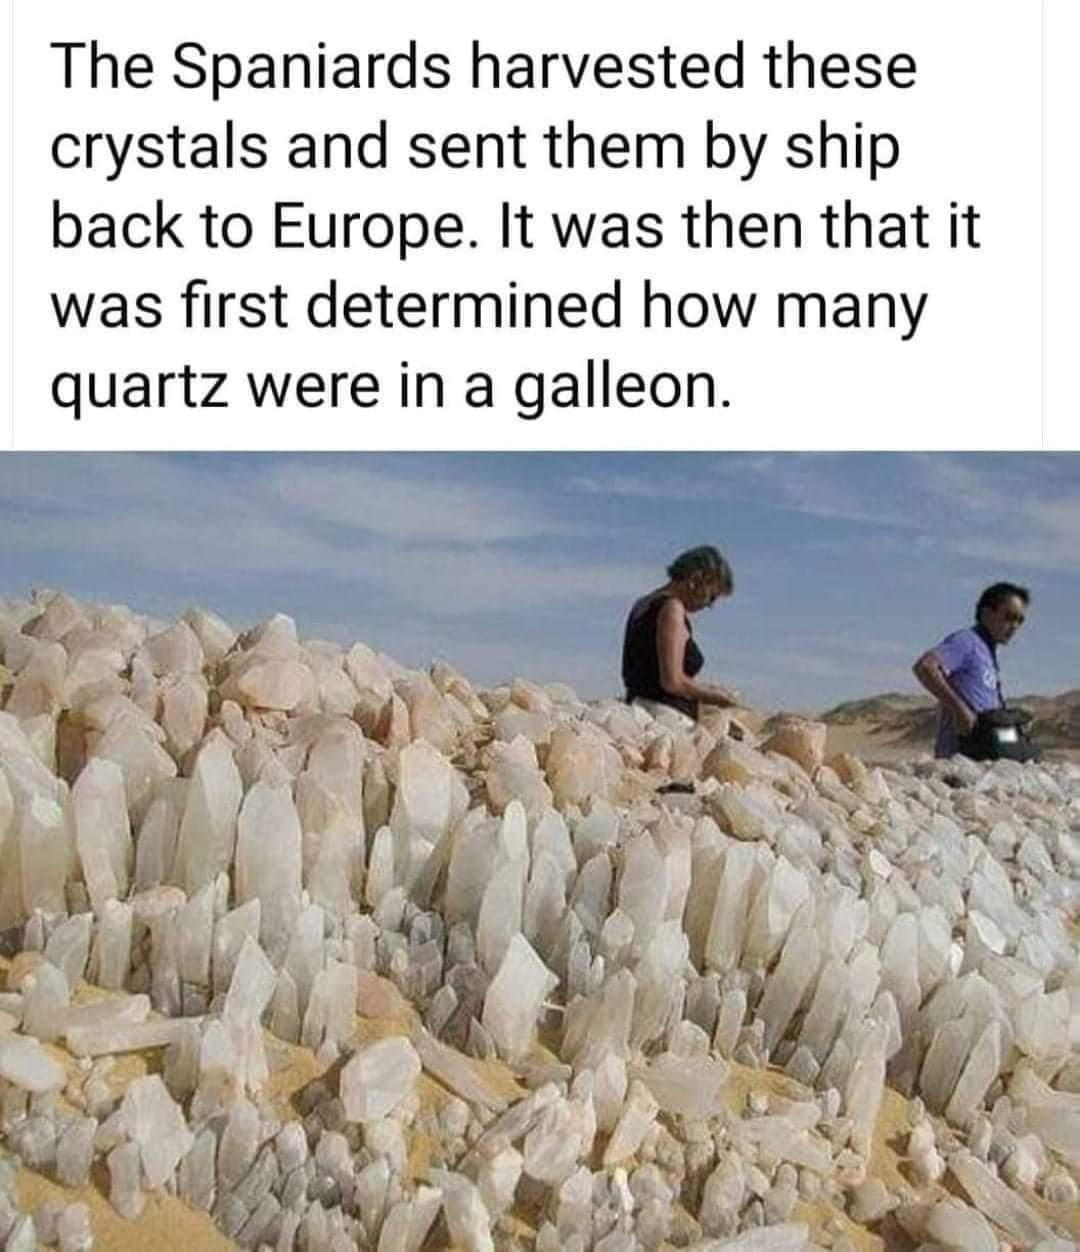 dank memes - rocky balboa puns - The Spaniards harvested these crystals and sent them by ship back to Europe. It was then that it was first determined how many quartz were in a galleon.